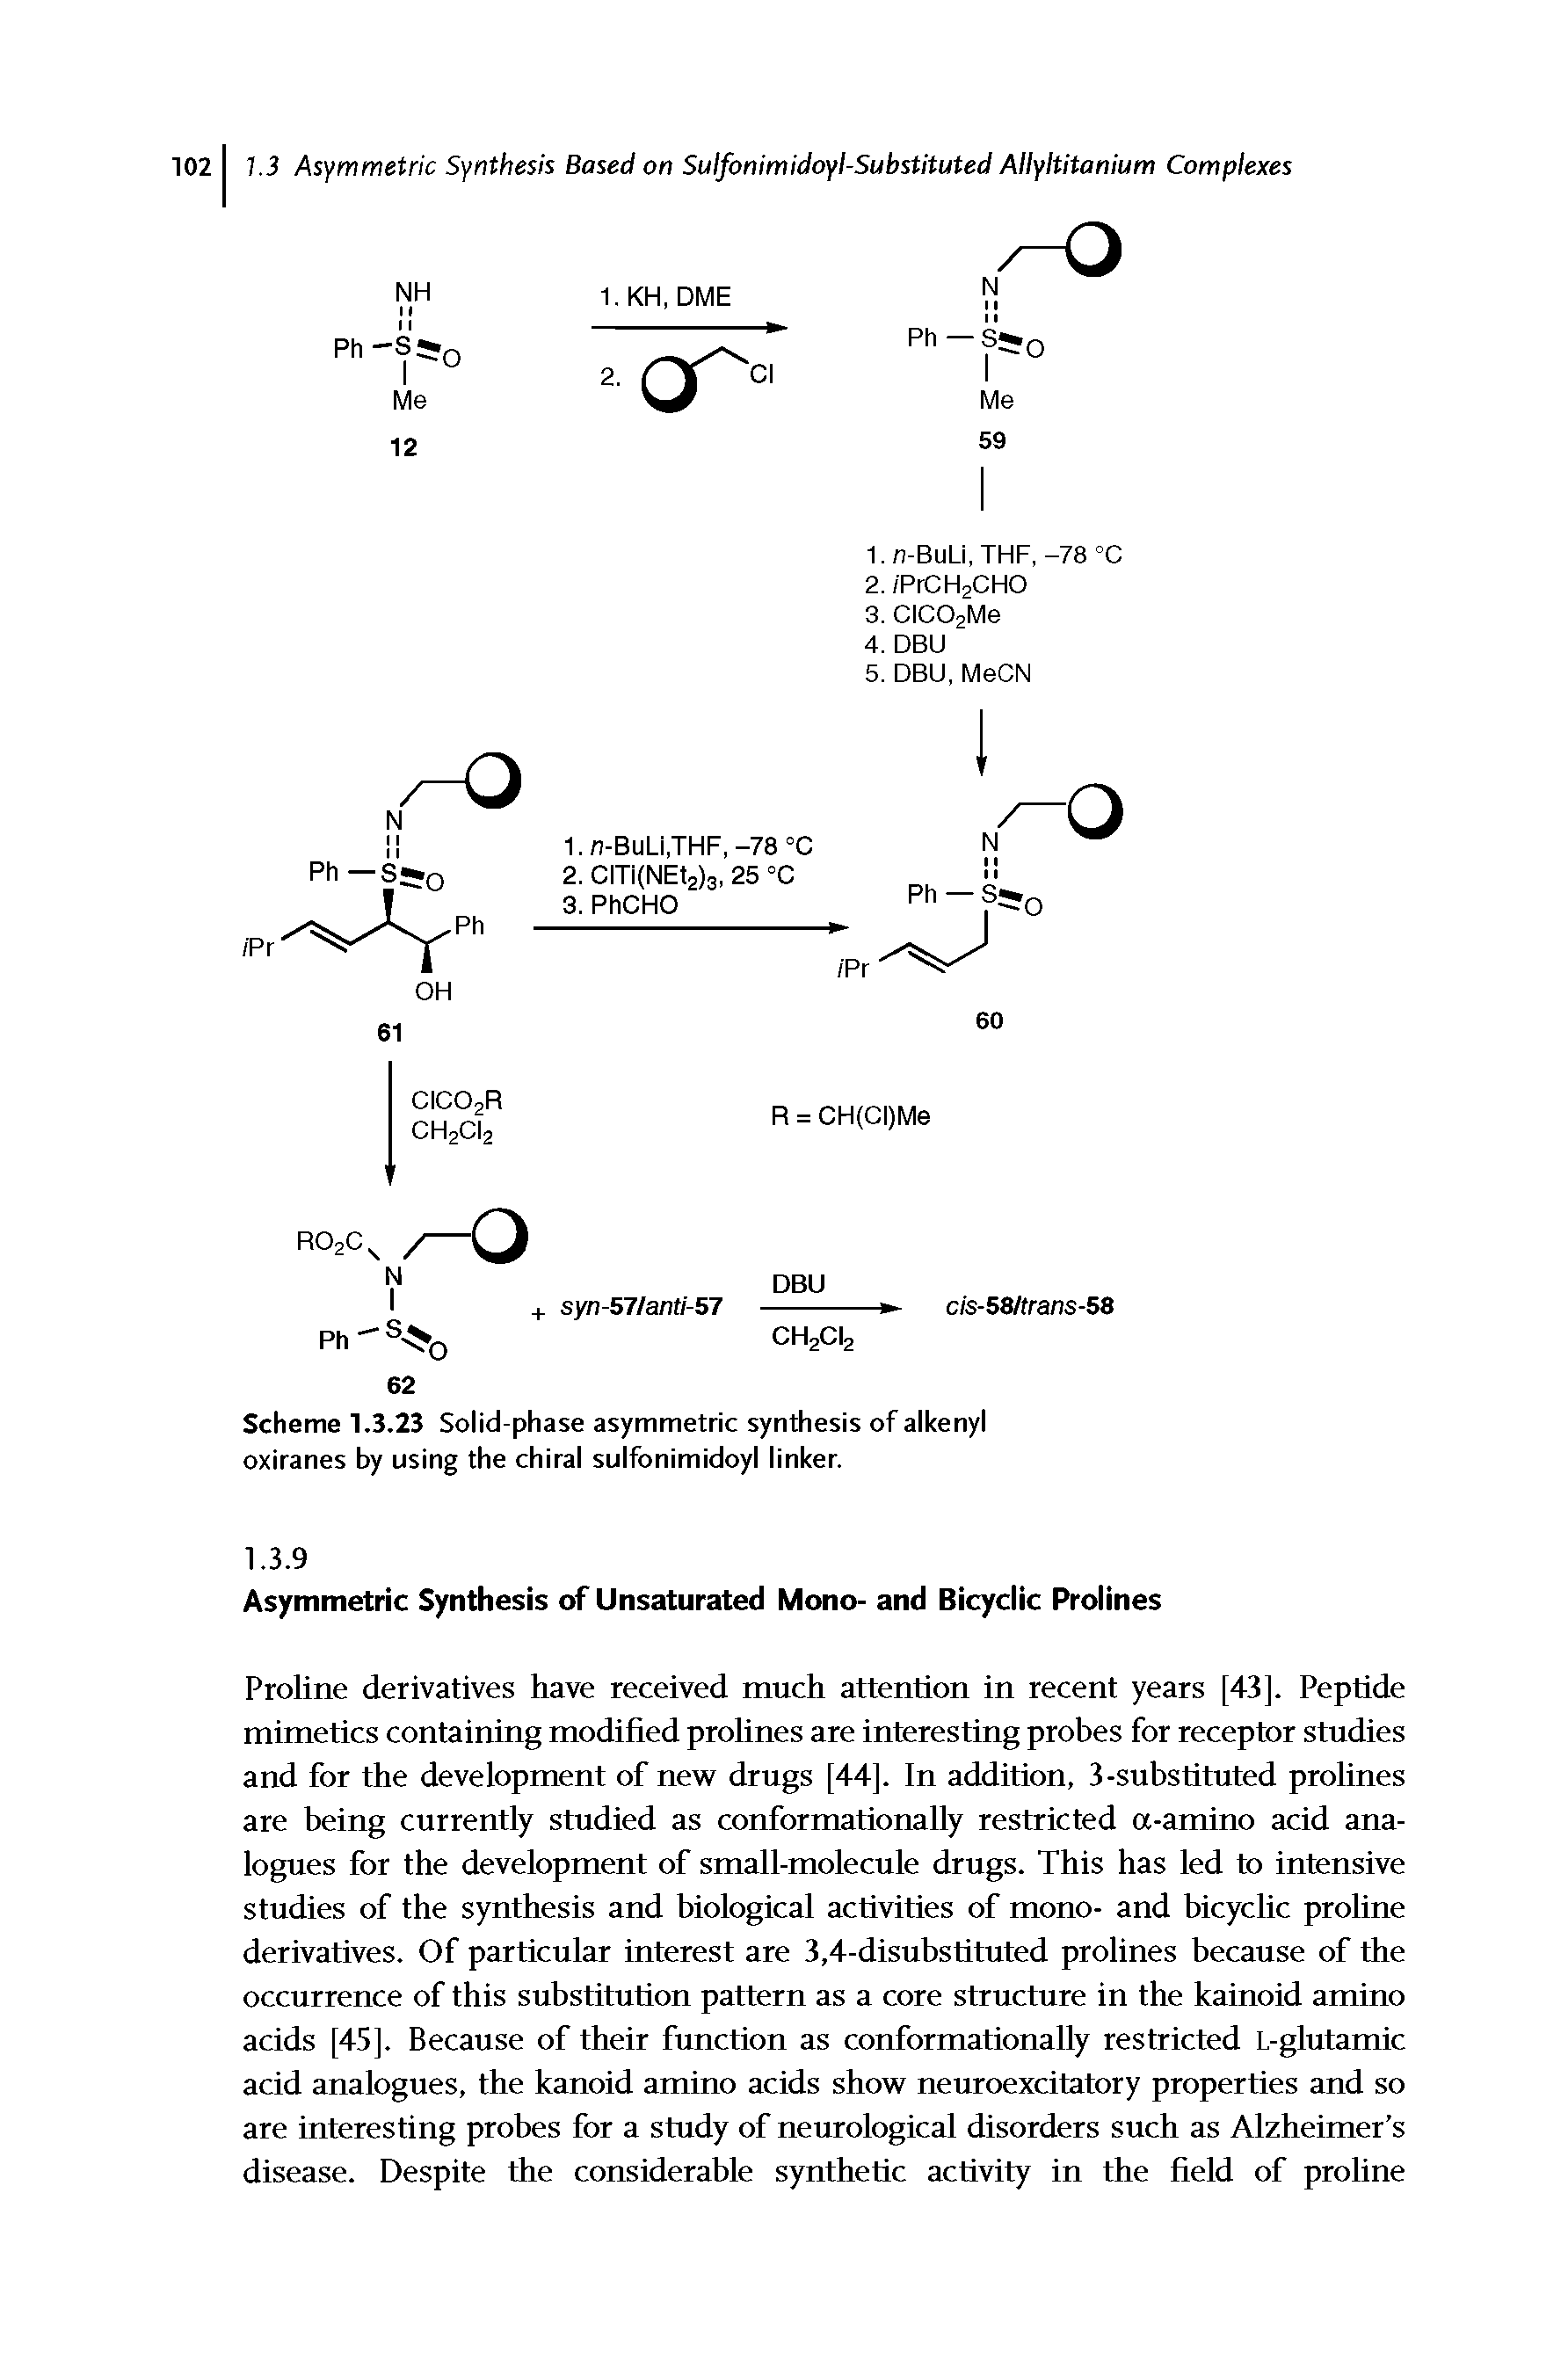 Scheme 1.3.23 Solid-phase asymmetric synthesis of alkenyl oxiranes by using the chiral sulfonimidoyl linker.